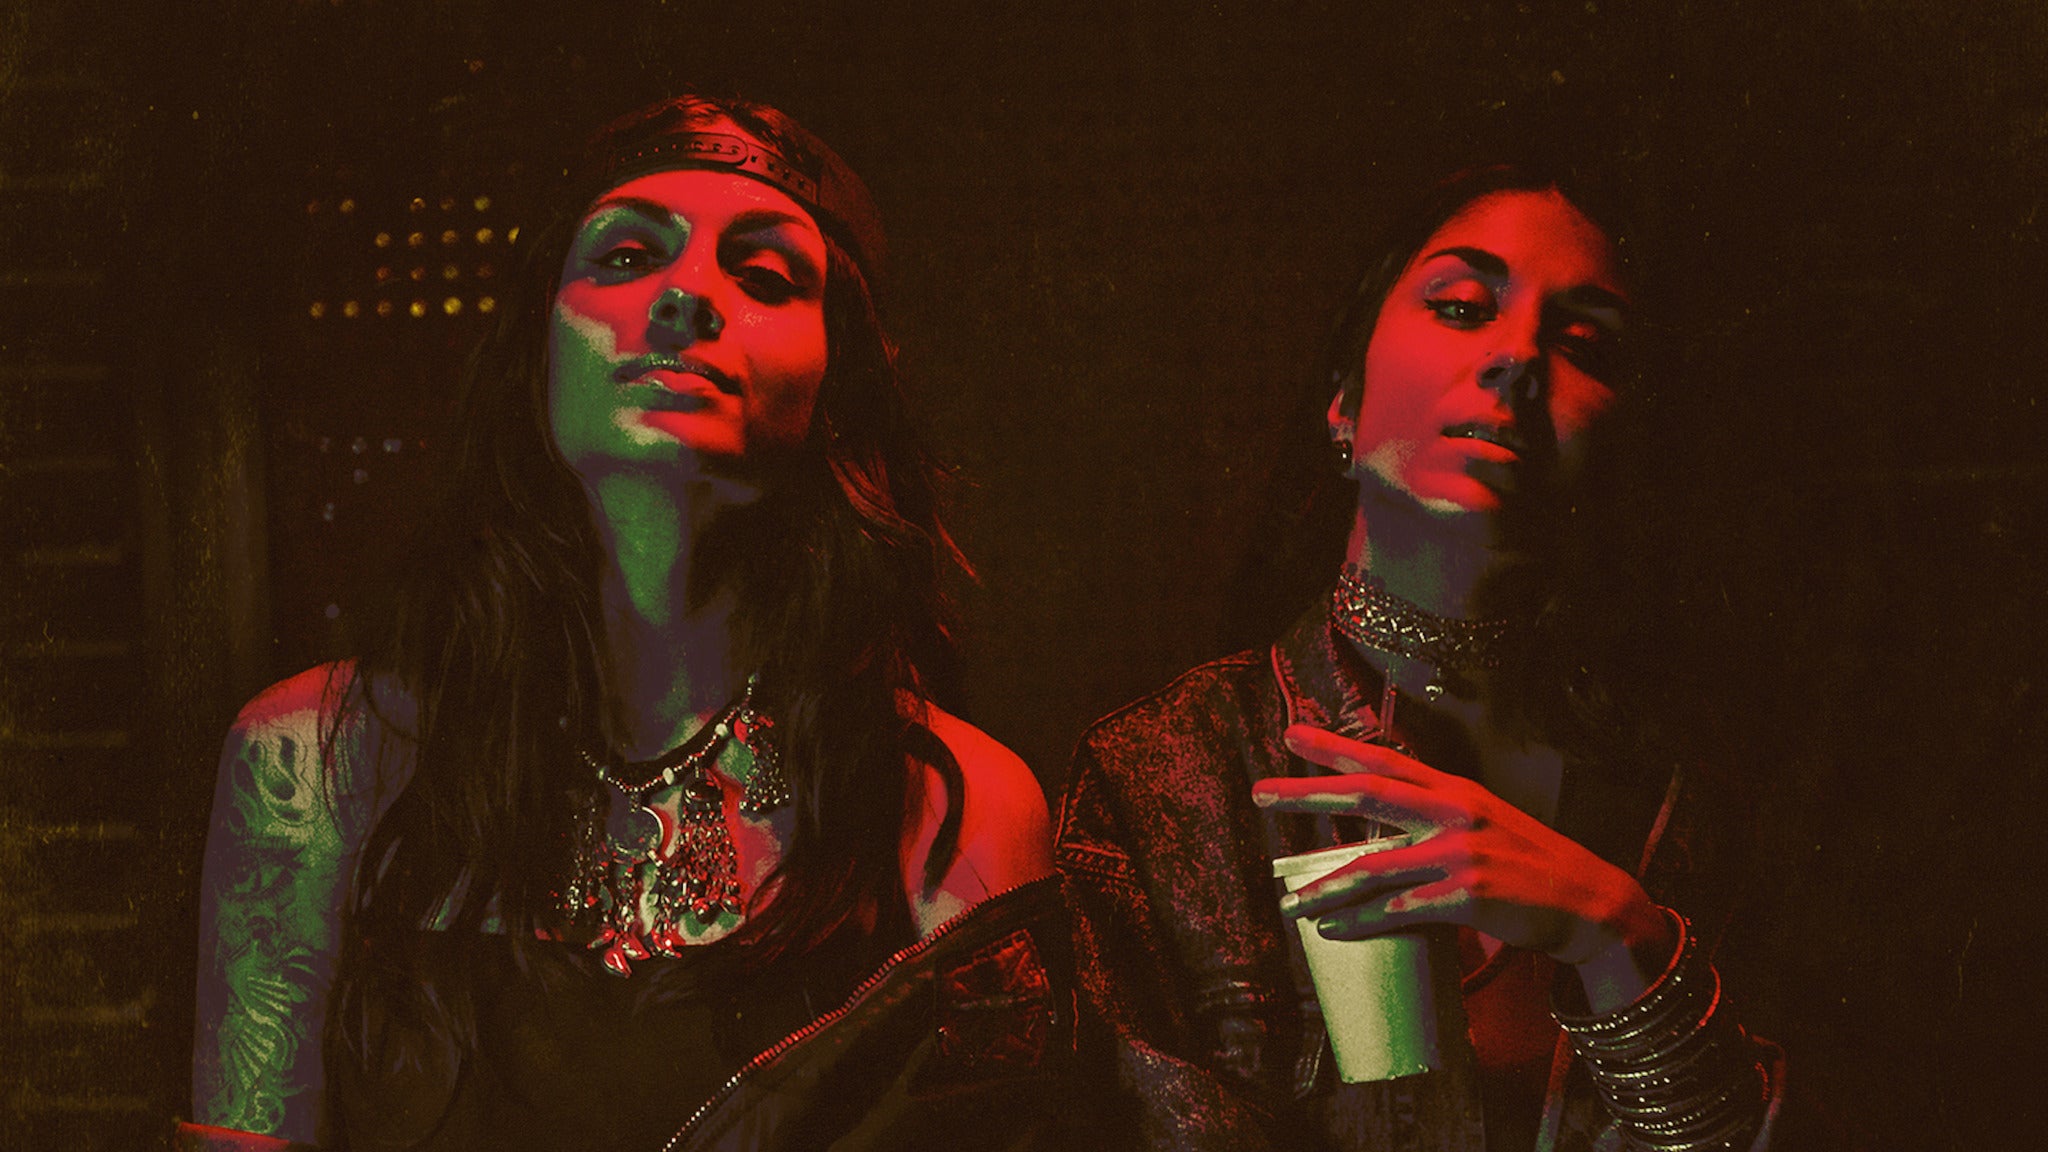 Krewella - New World Tour presented by SiriusXM BPM in Chicago promo photo for Citi® Cardmember Preferred presale offer code